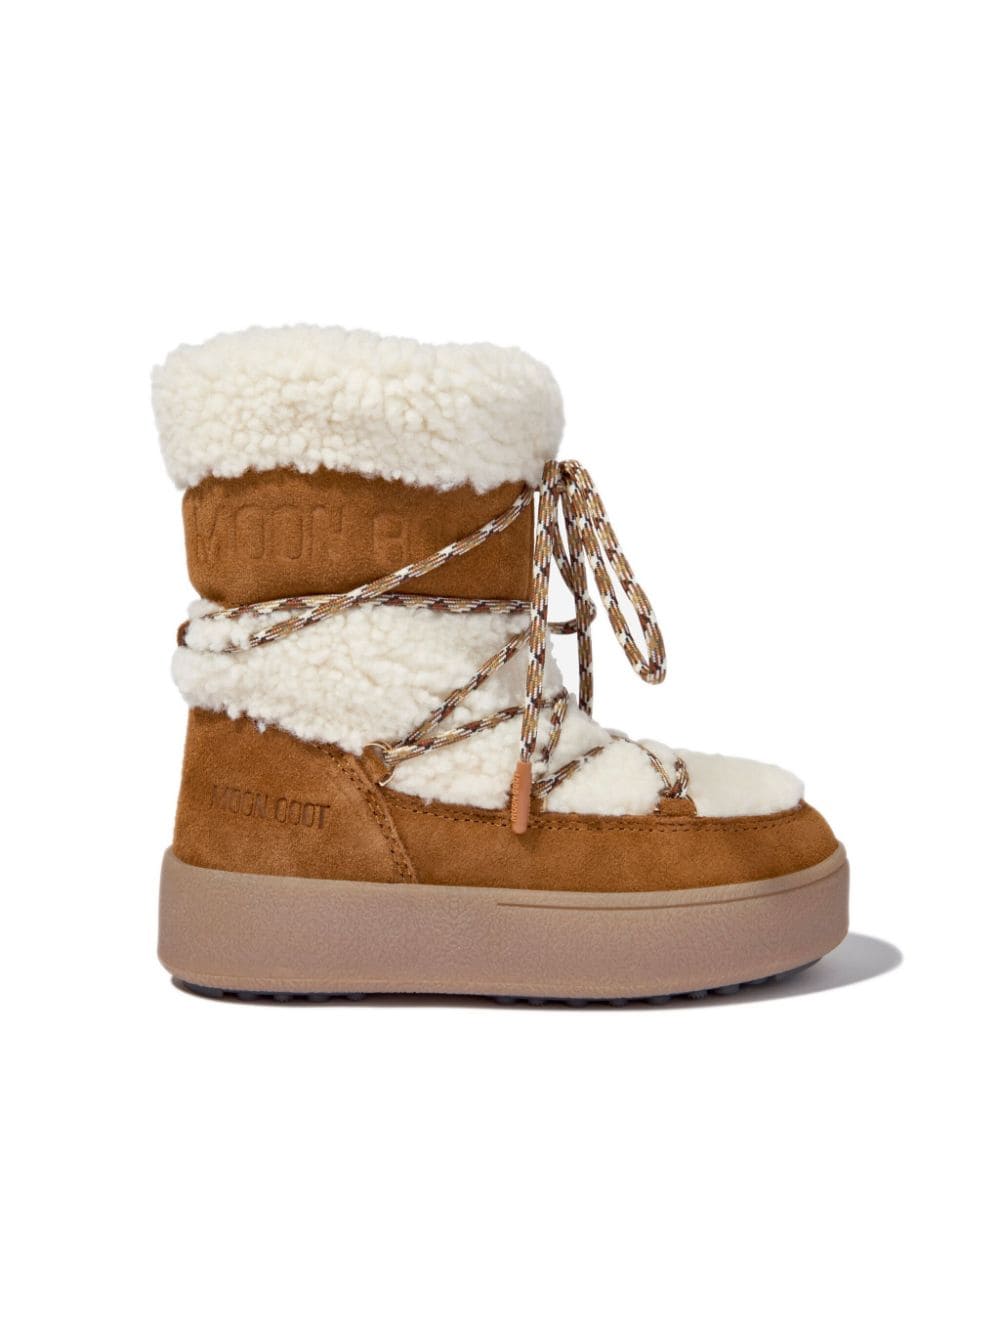 Image 2 of Moon Boot Kids Ltrack Tube shearling boots